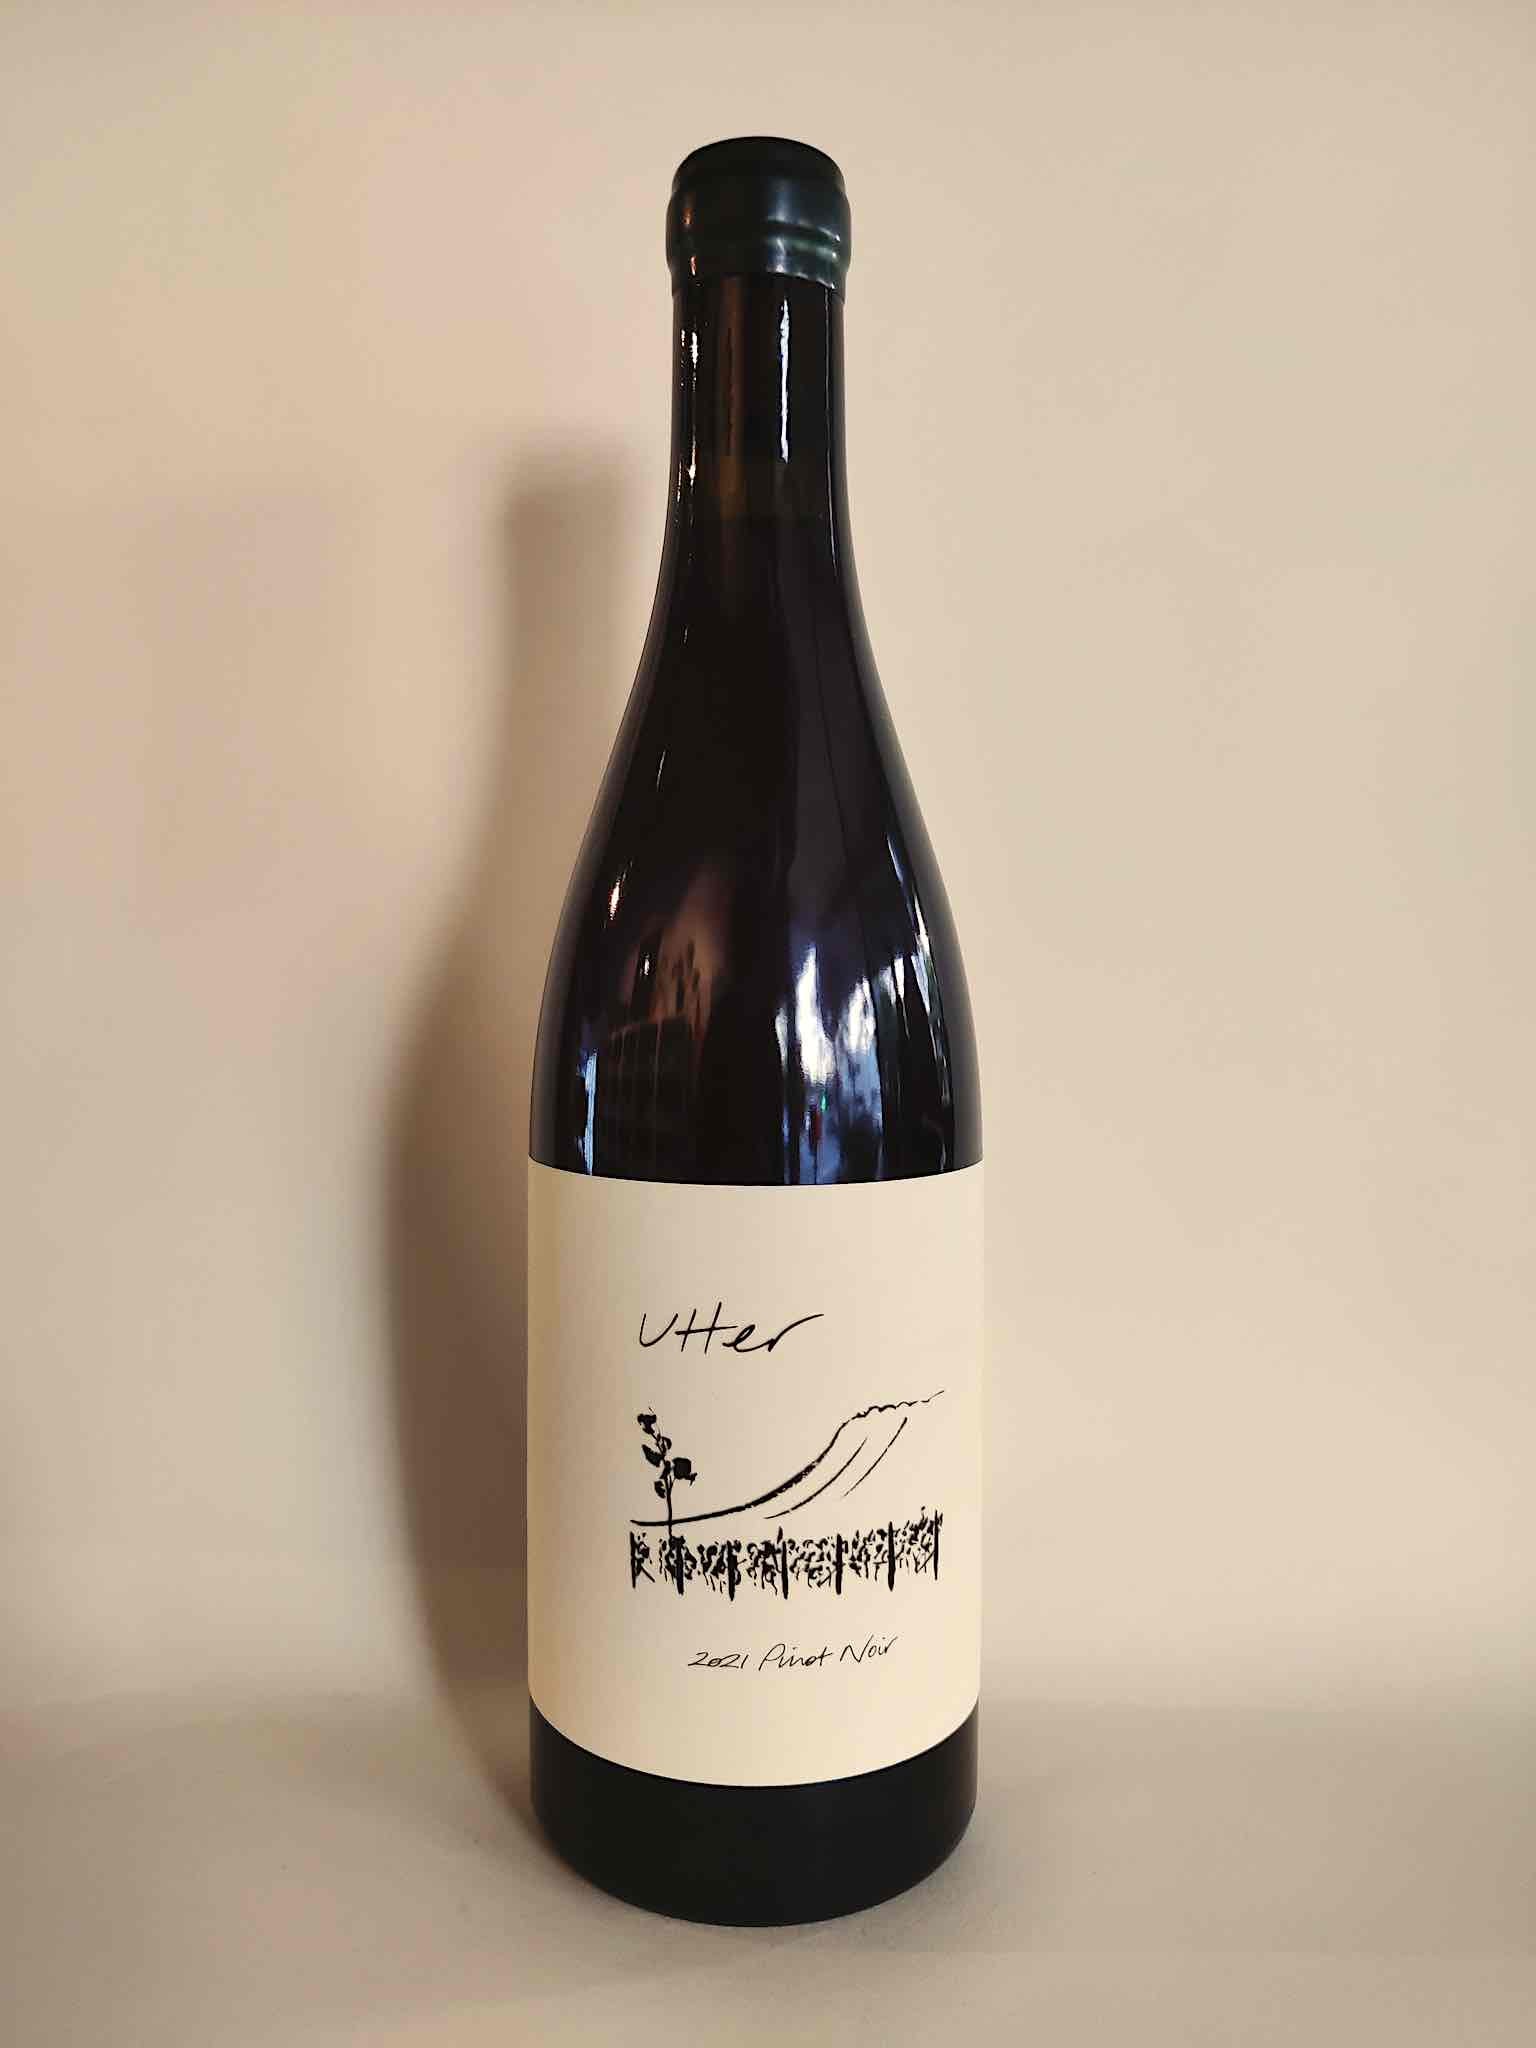 A bottle of Utter Wines Pinot Noir from the Cathedral Ranges in Victoria